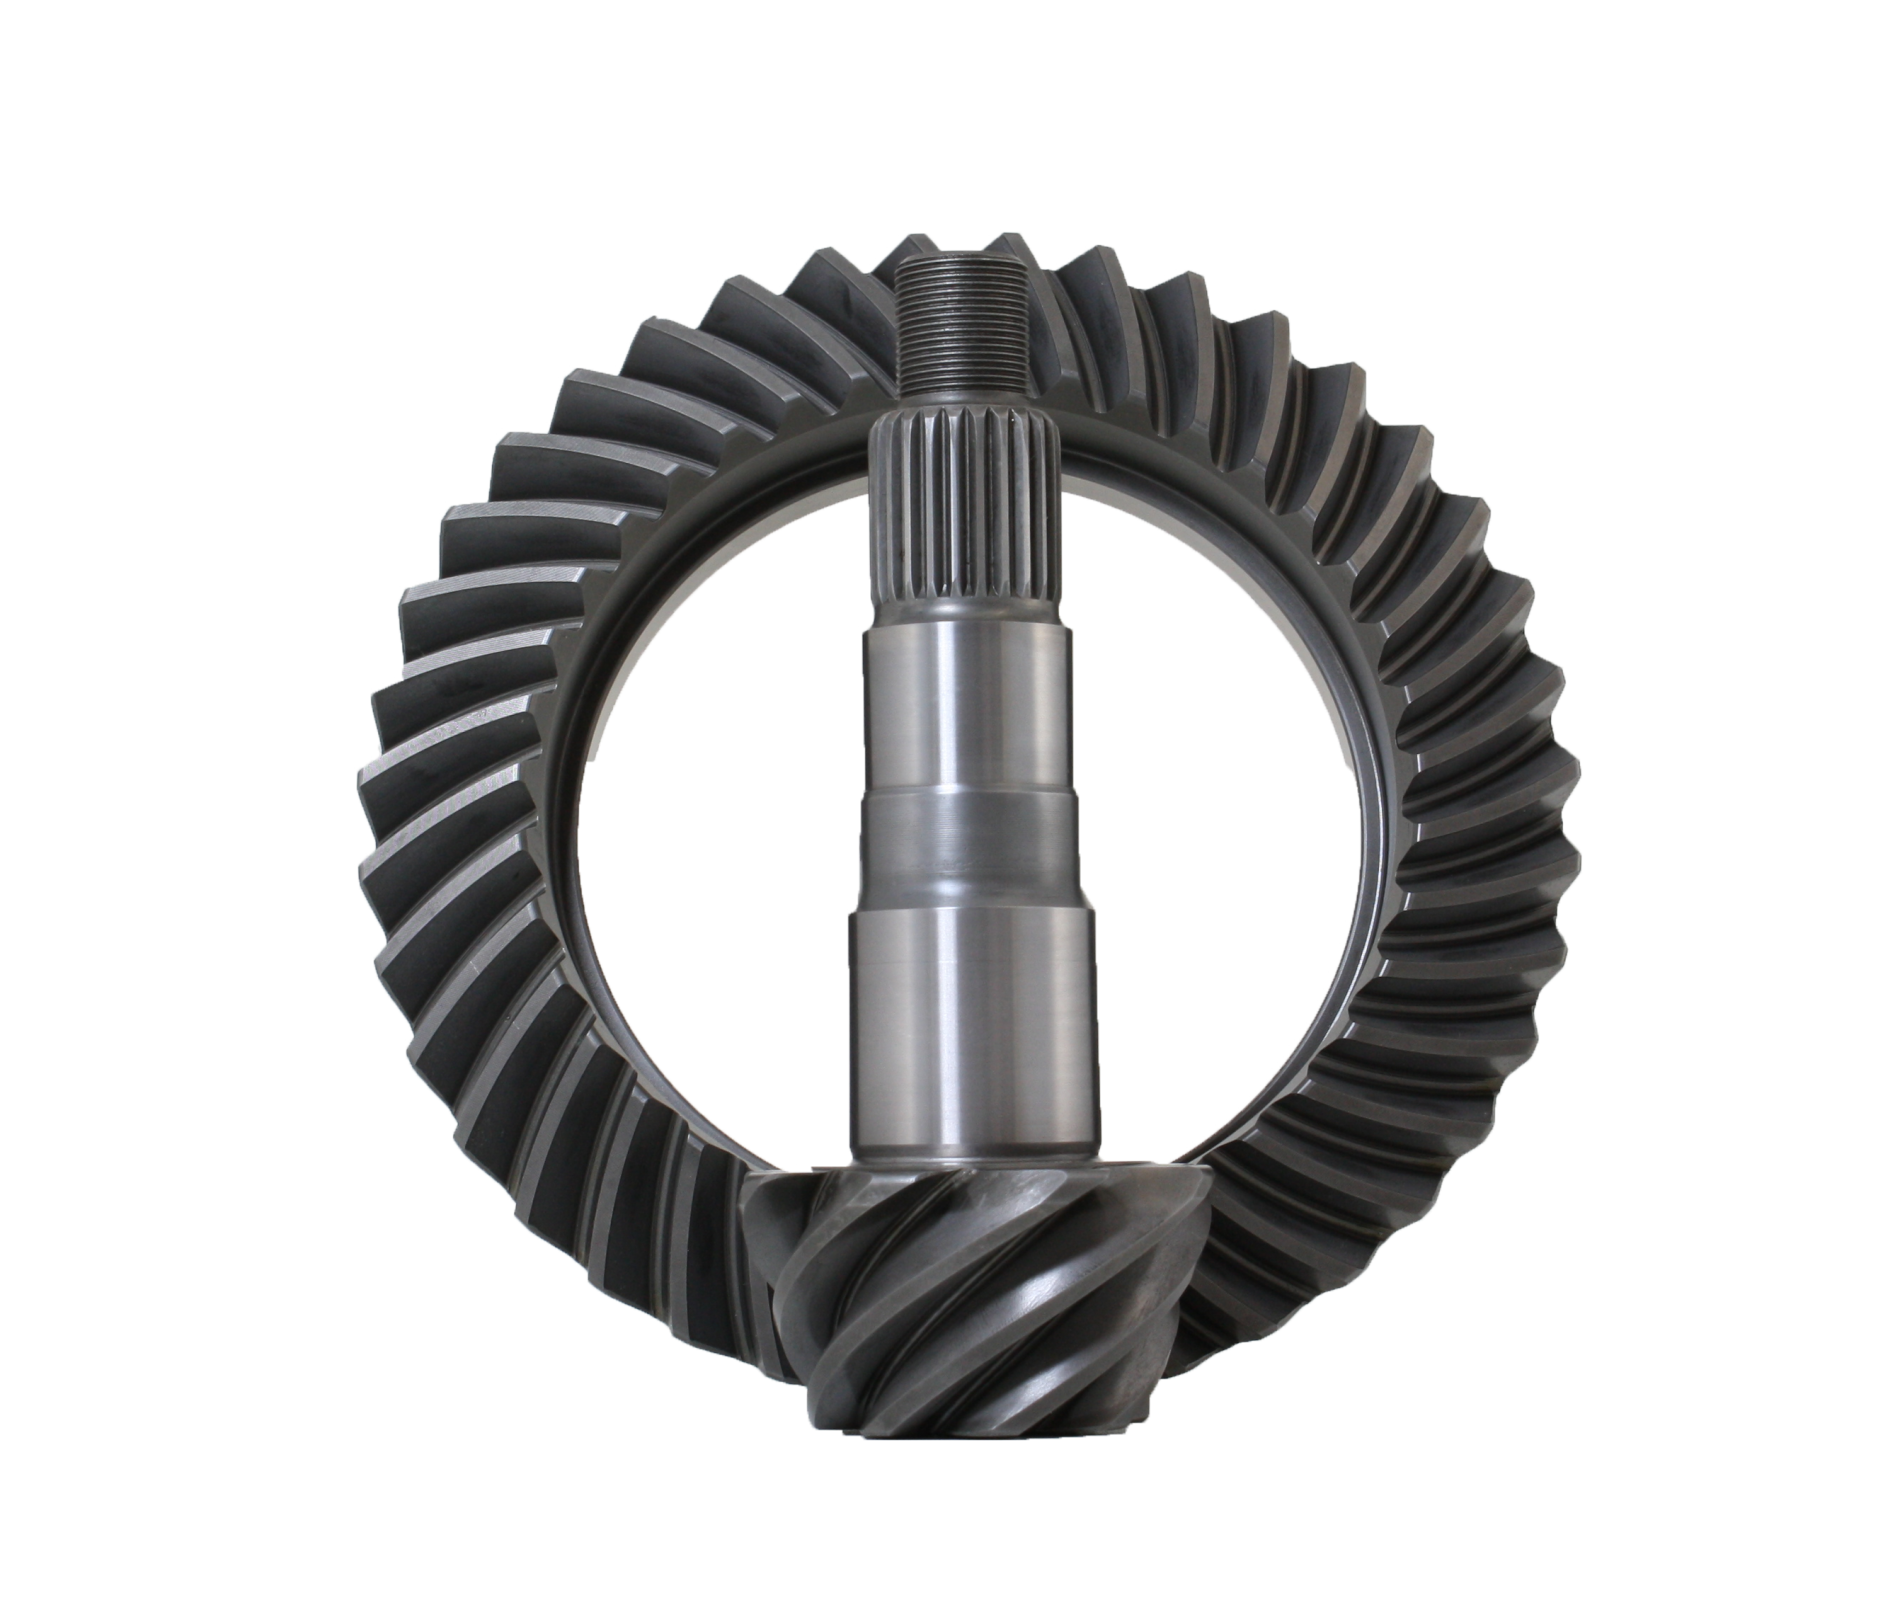 Revolution Gear Dana 44 4.10 Reverse Thick Ring and Pinion Gear Set, Front - JK Rubicon Only